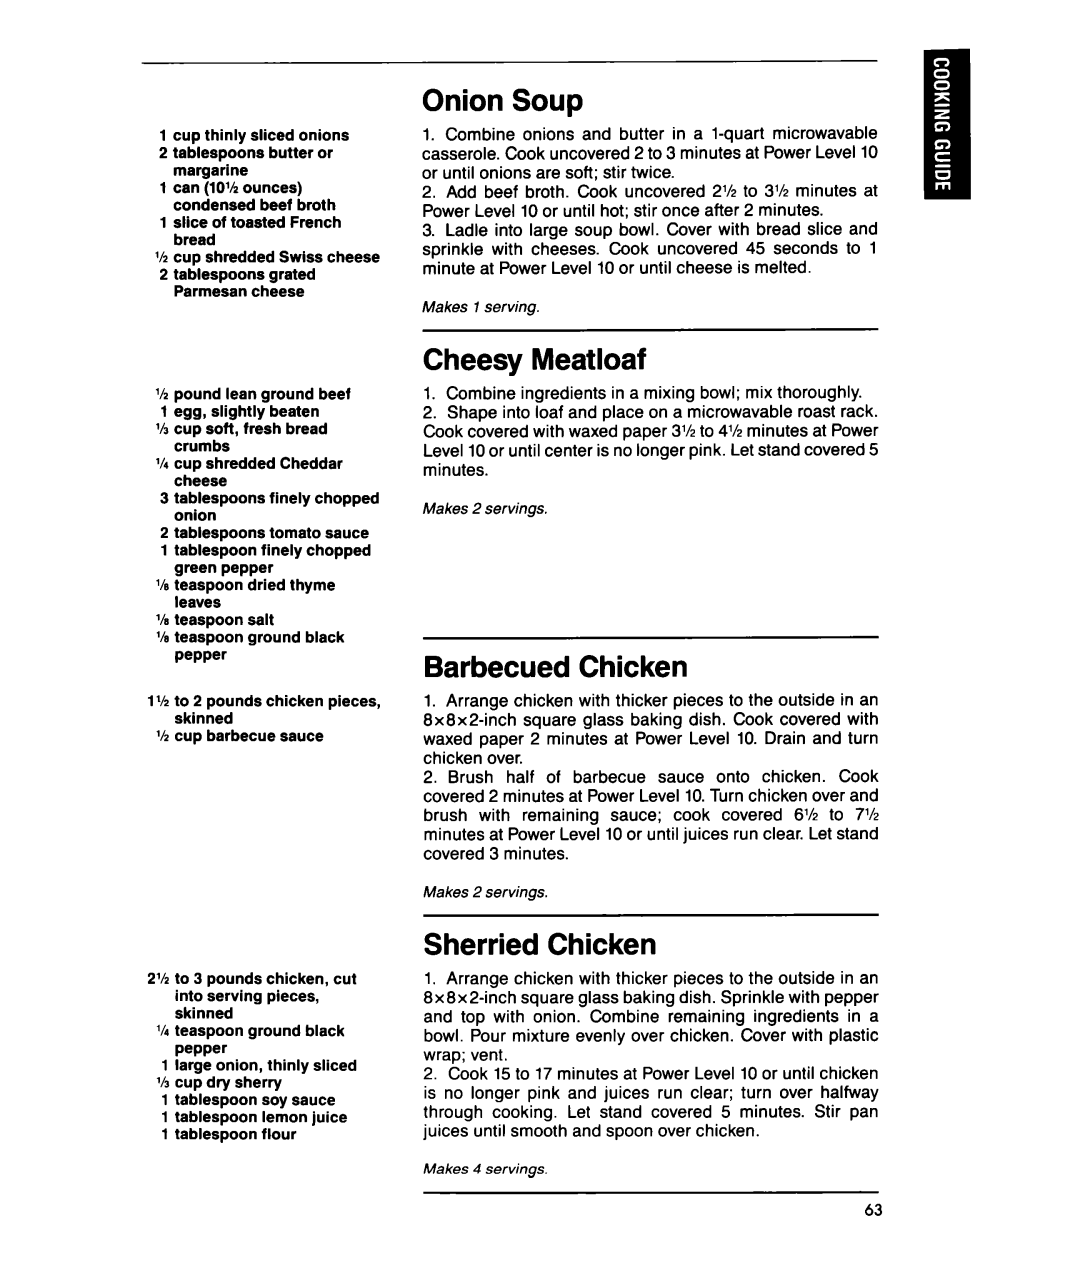 Whirlpool MTZ080XY user manual Onion Soup, Cheesy Meatloaf, Barbecued Chicken, Sherried Chicken 